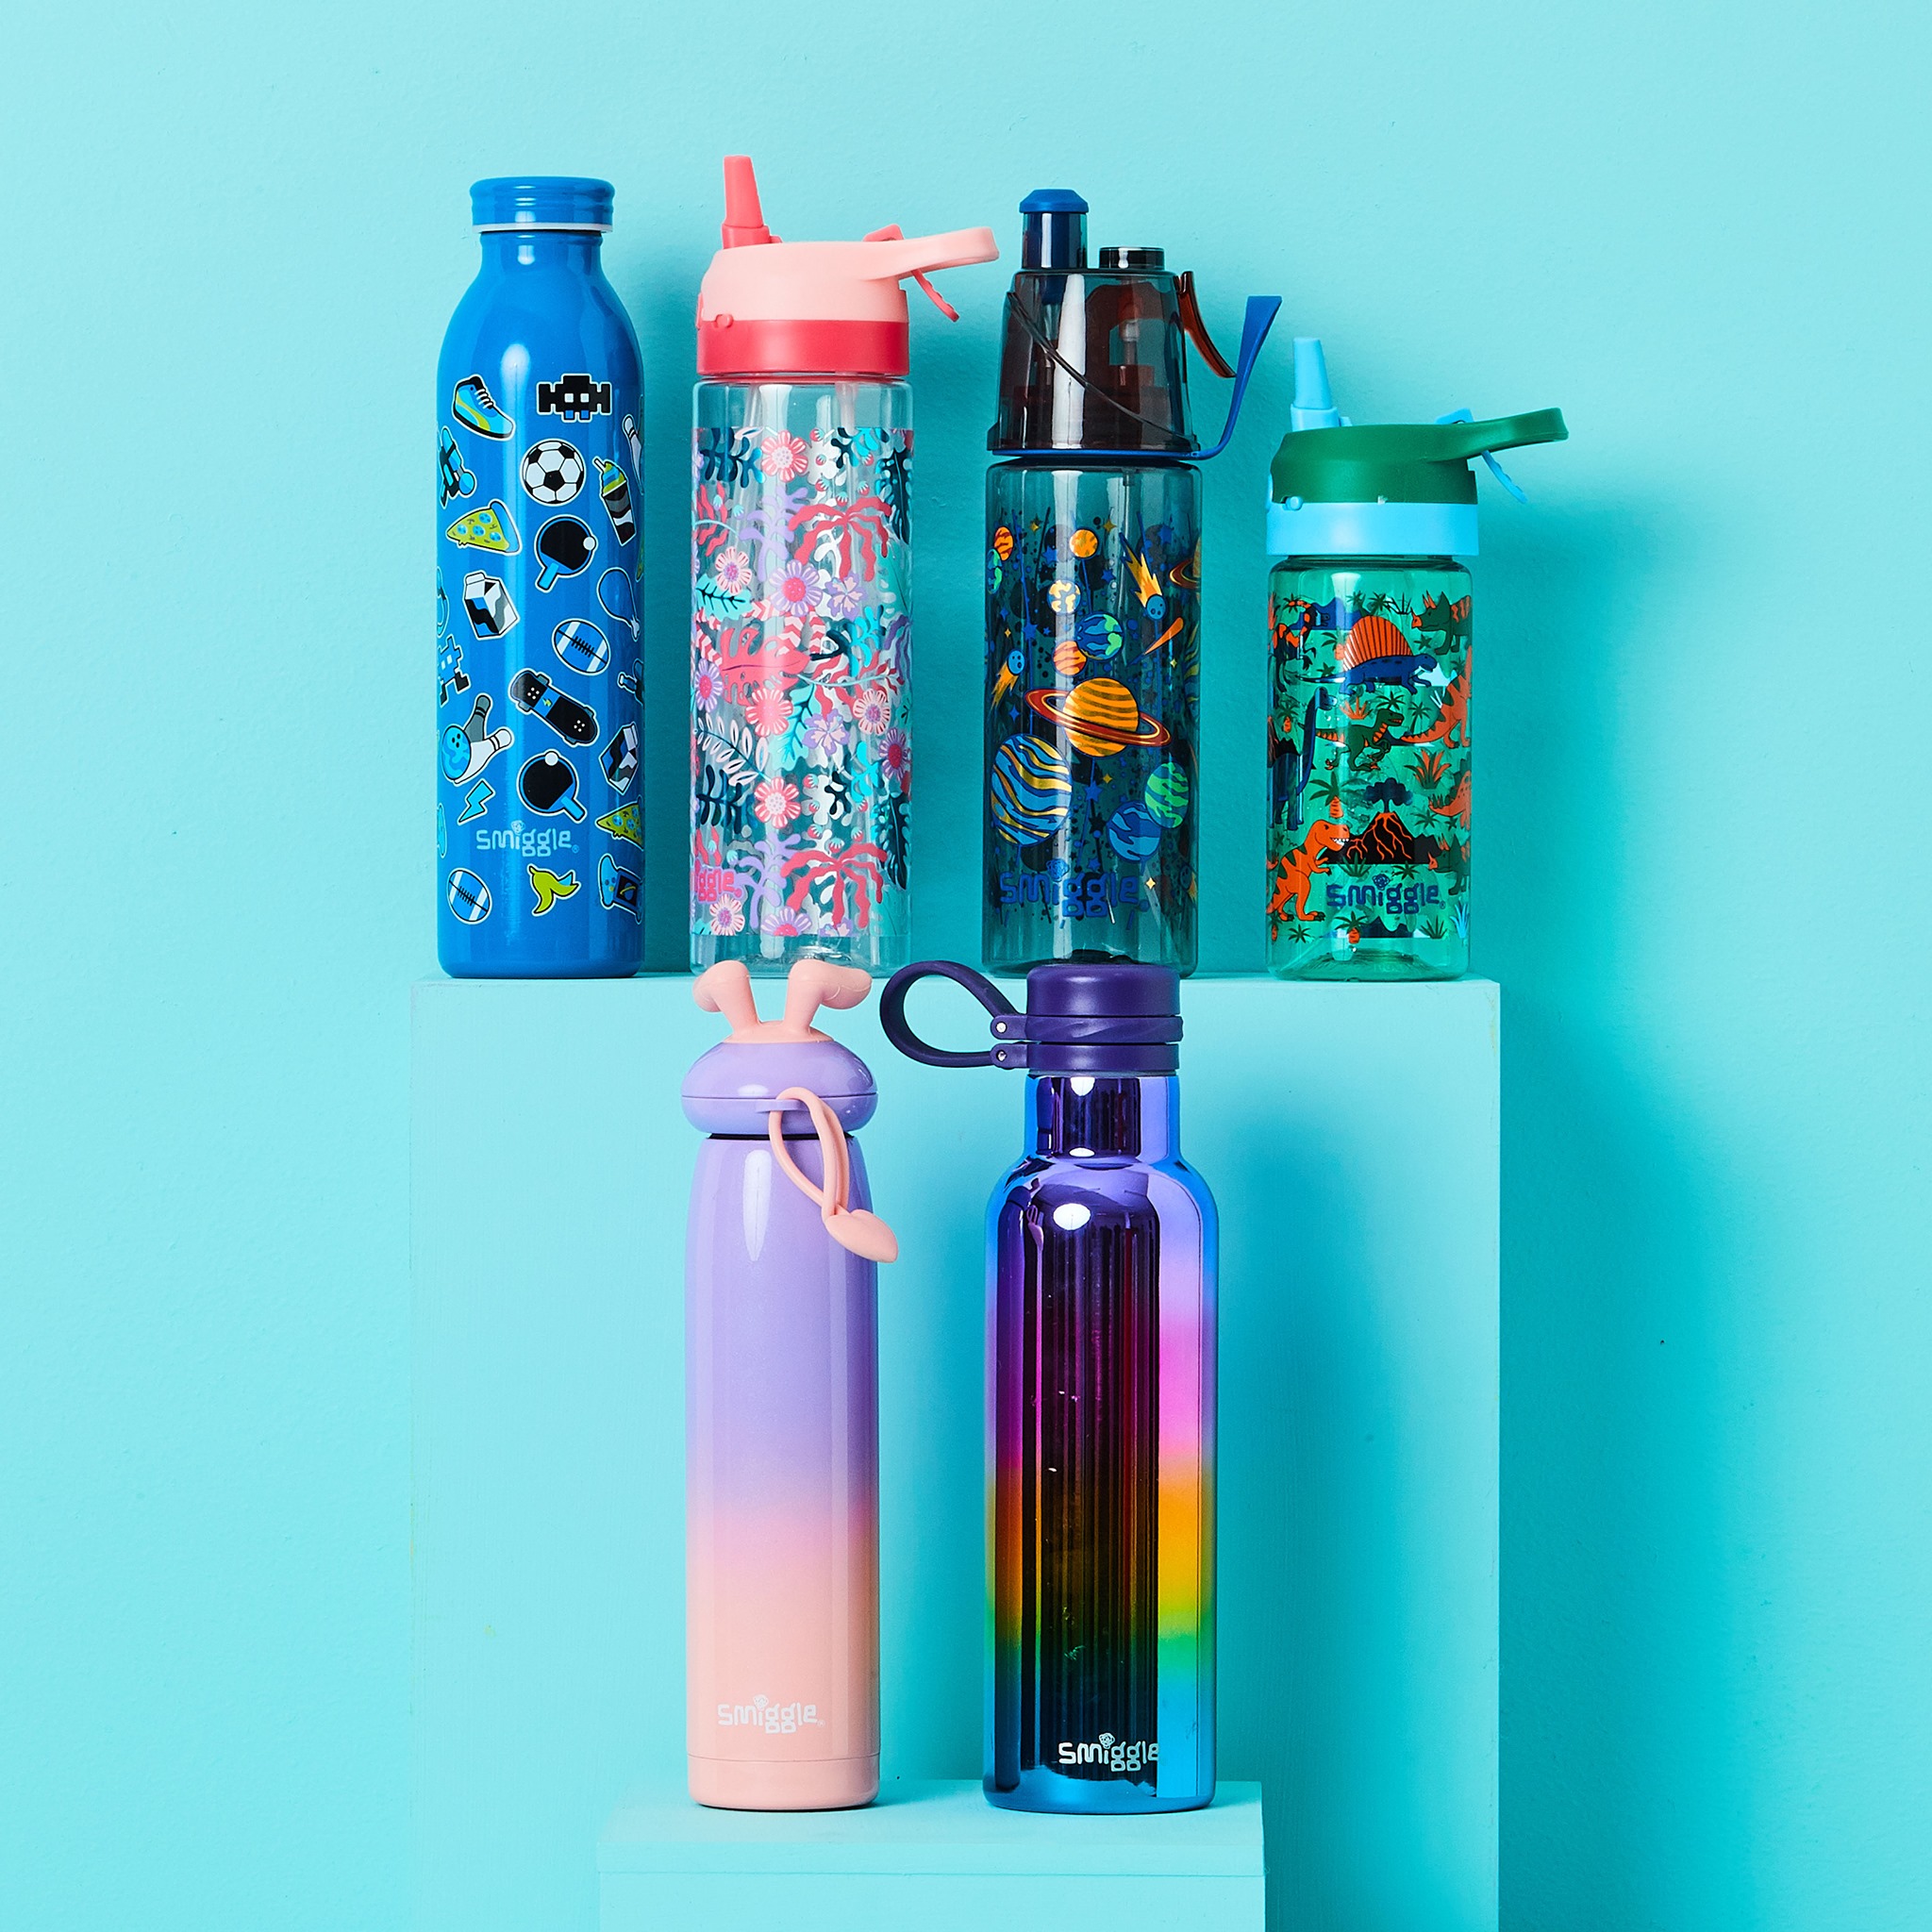 Stay hydrated with smiggle! Our range of bottles are refillable, fits easily into your backpack and comes in loads of different prints and designs! Head instore today to get yours!😄